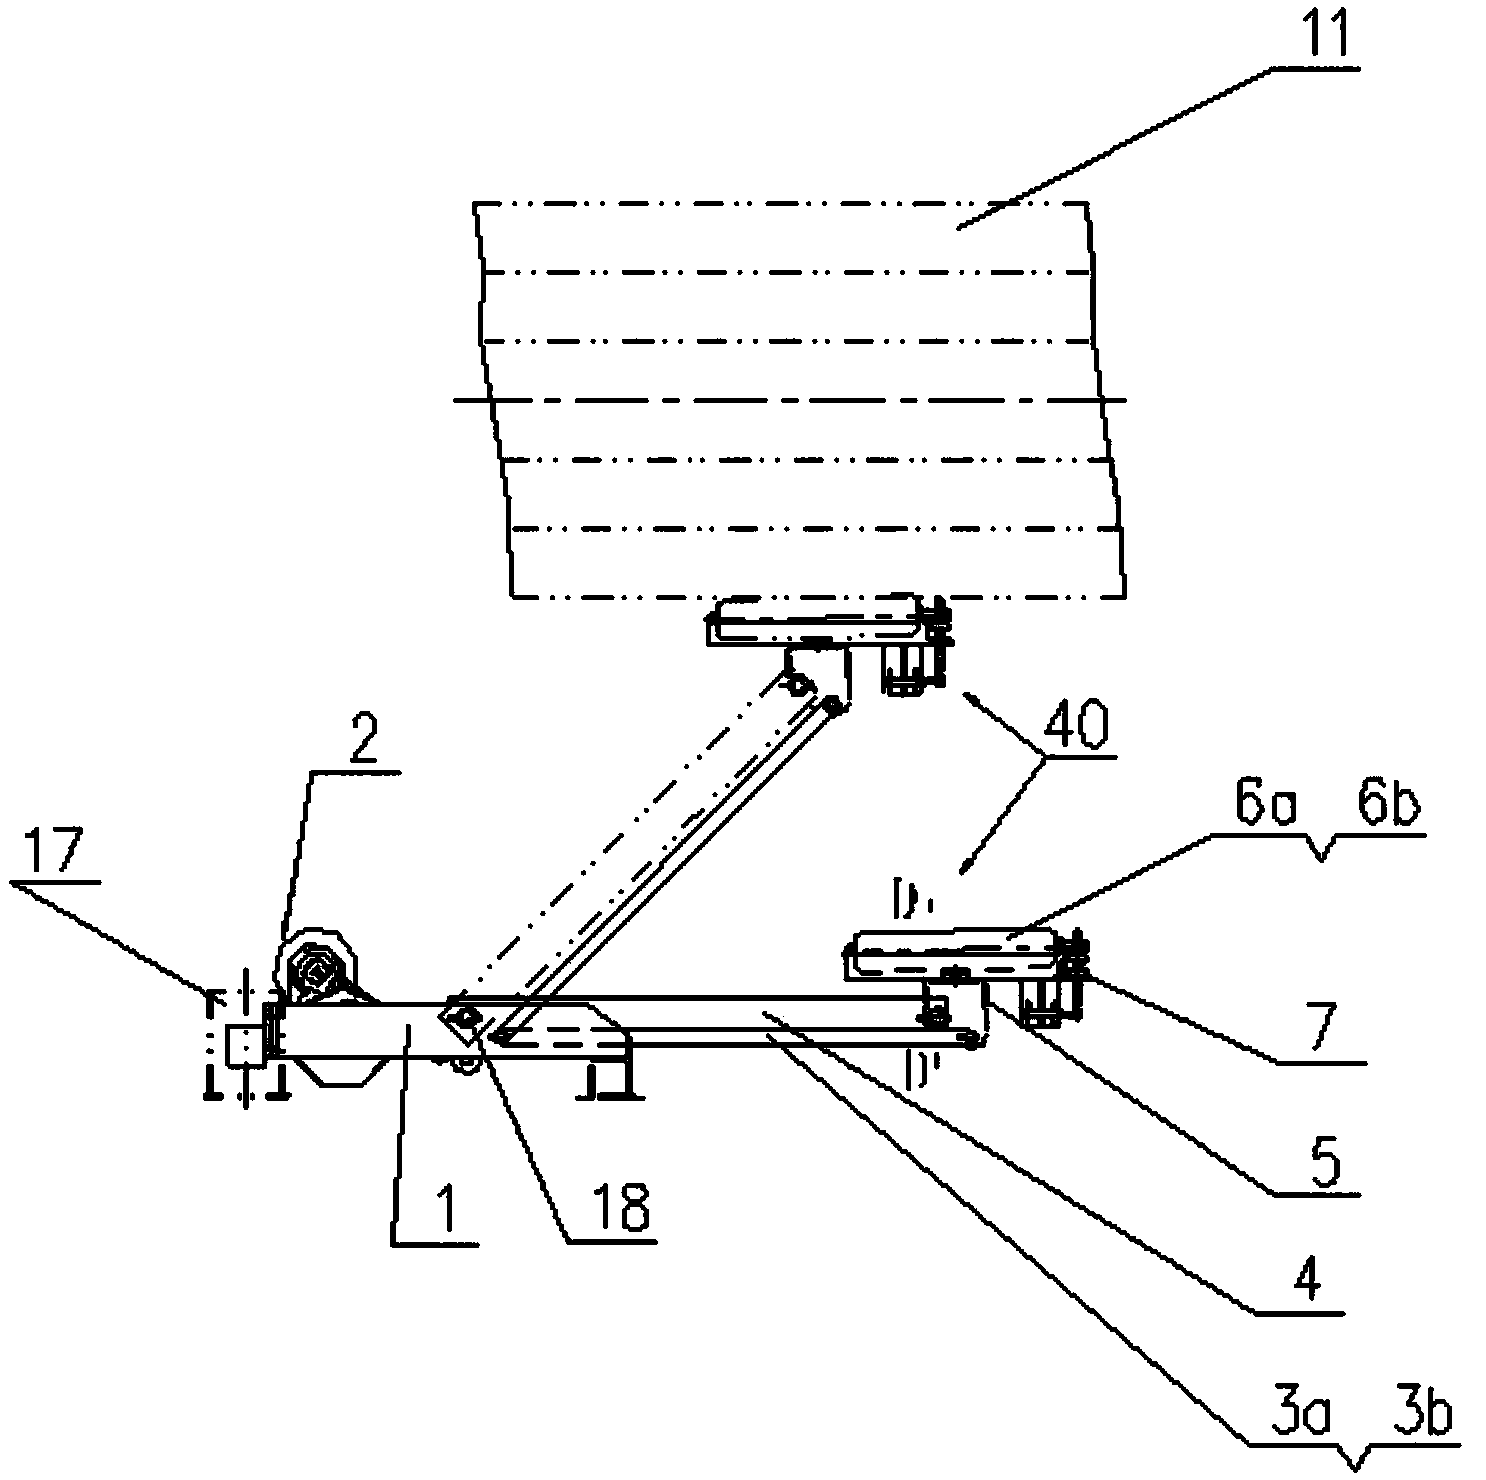 Novel cage supporting device of steel reinforcement cage seam welder